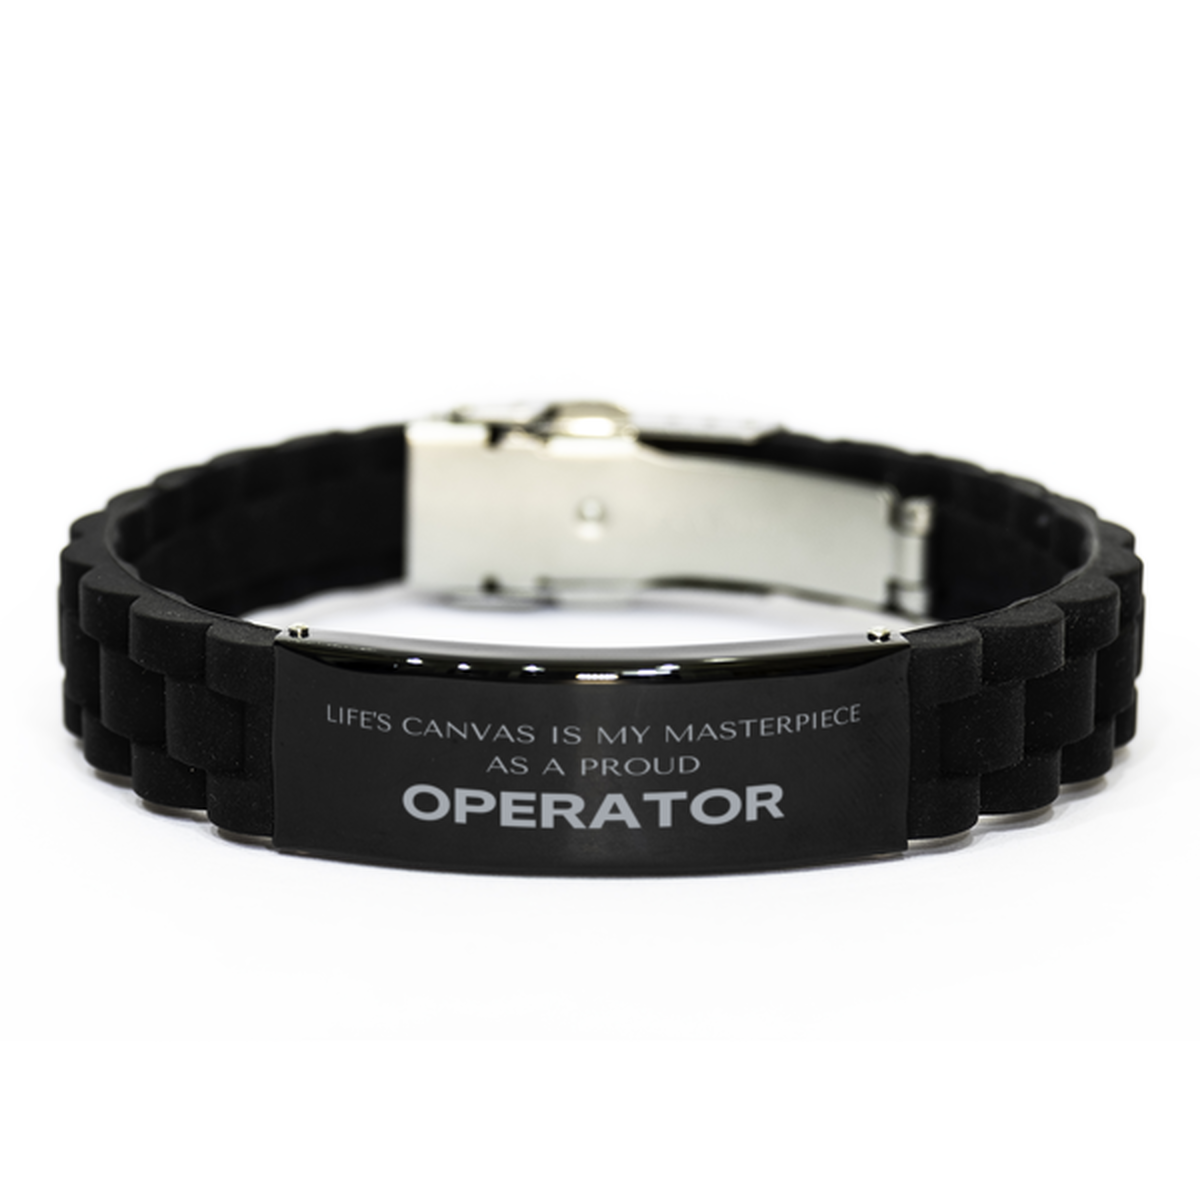 Proud Operator Gifts, Life's canvas is my masterpiece, Epic Birthday Christmas Unique Black Glidelock Clasp Bracelet For Operator, Coworkers, Men, Women, Friends